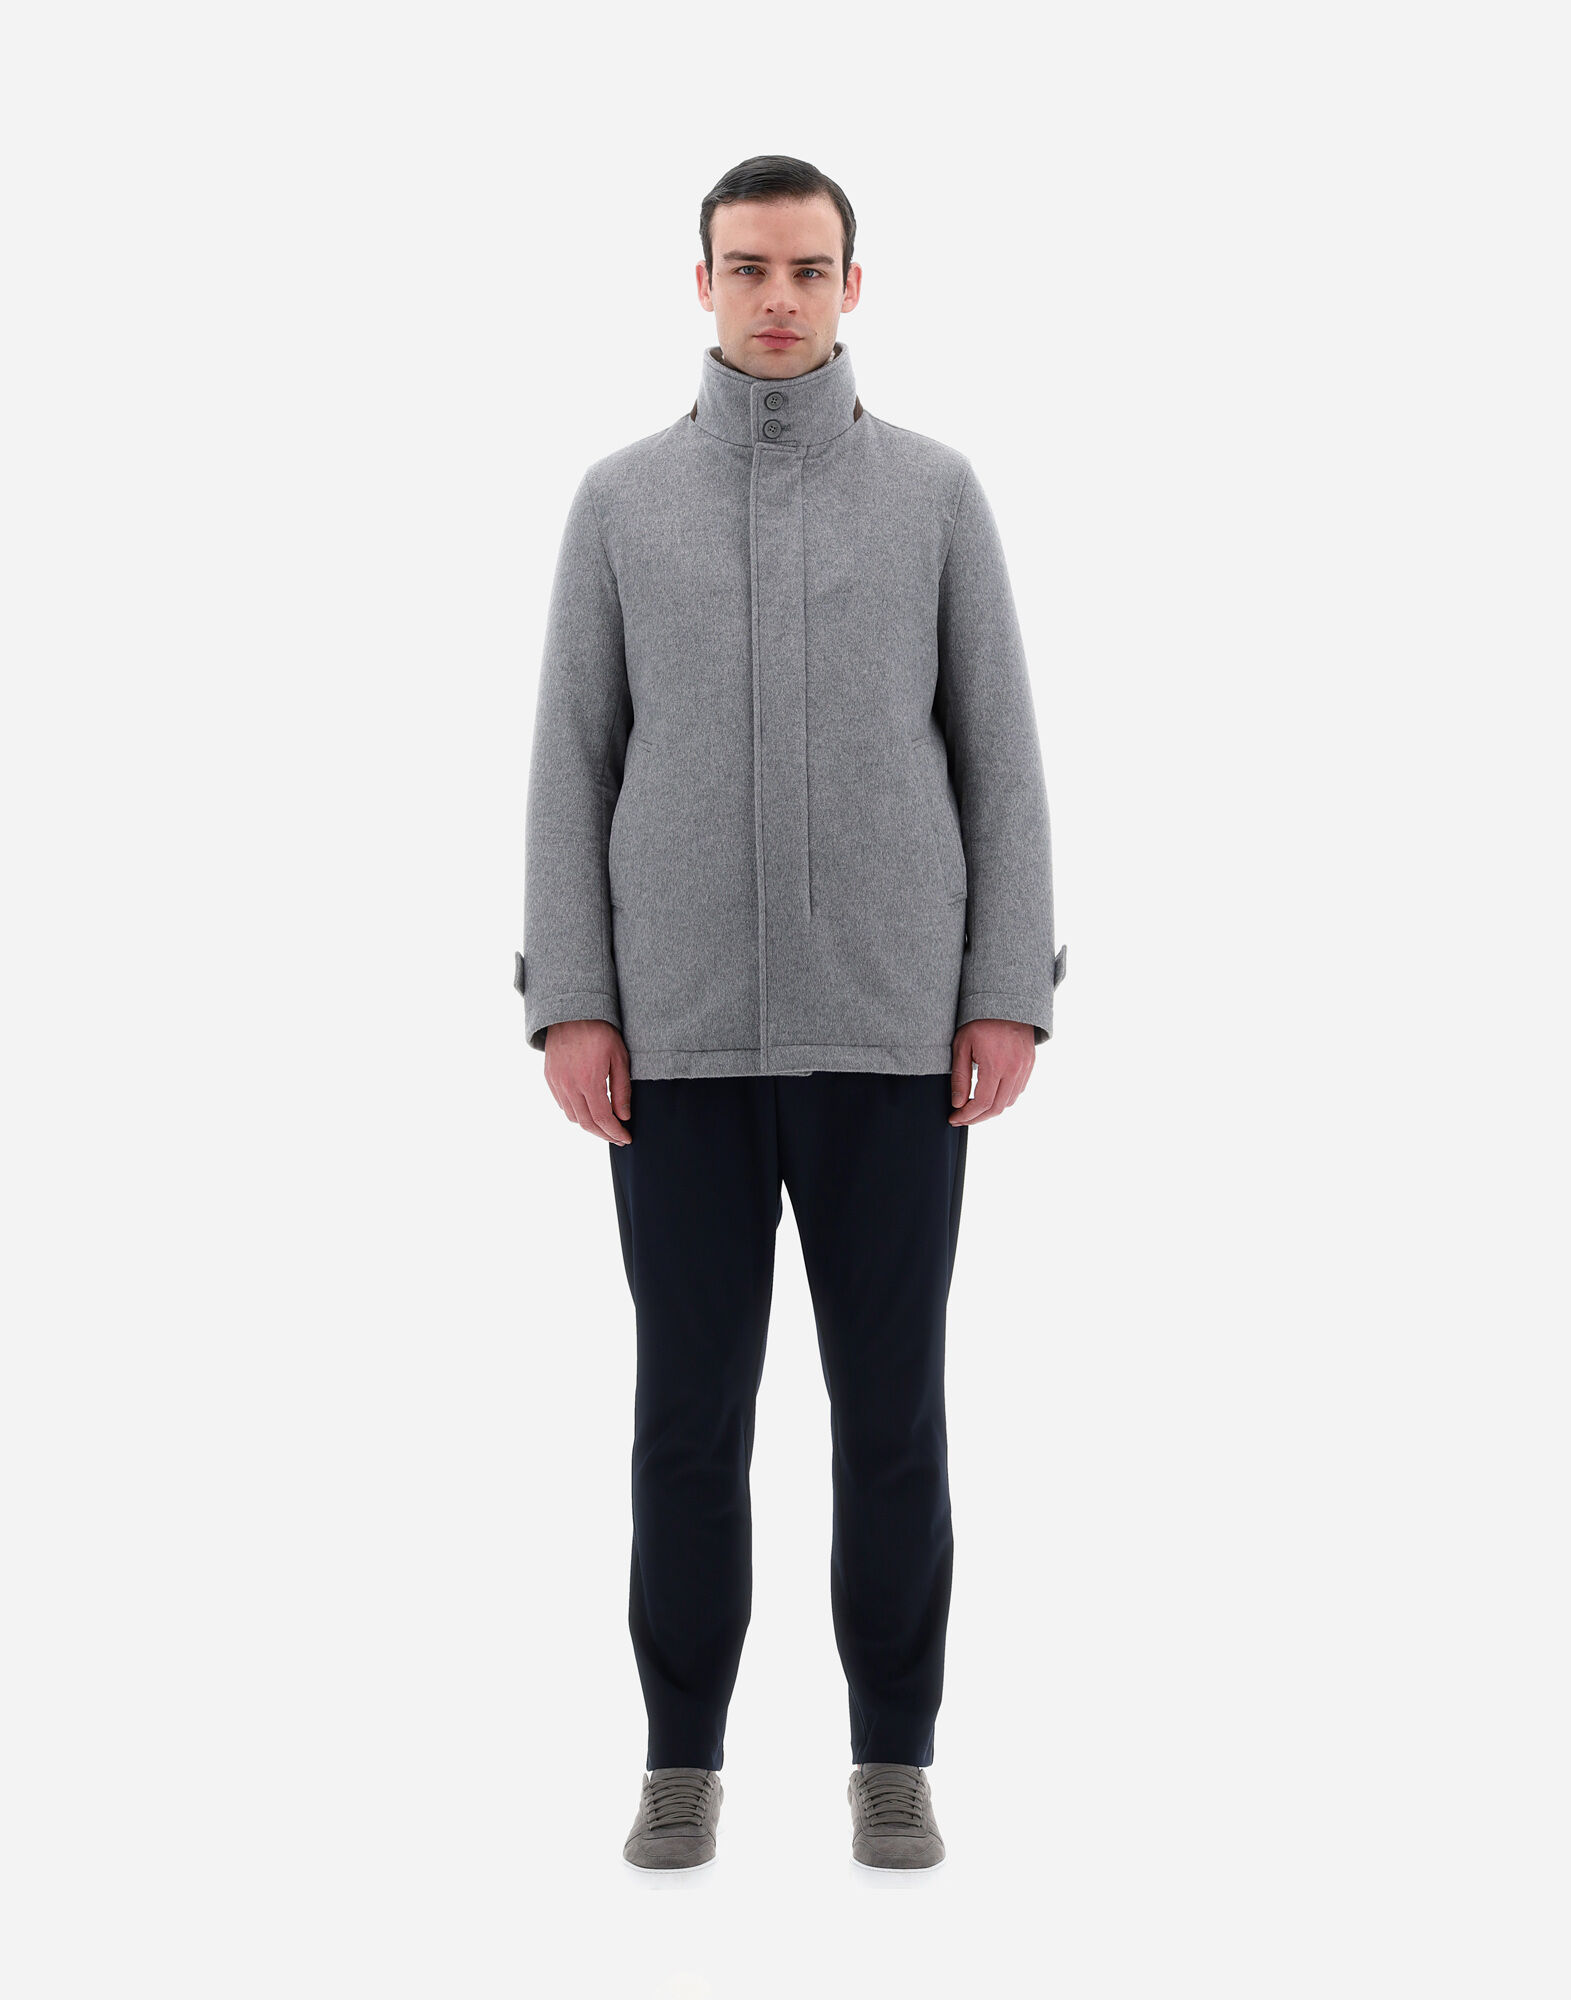 CARCOAT IN CASHMERE AND NYLON ULTRALIGHT in Grey for Men | Herno®